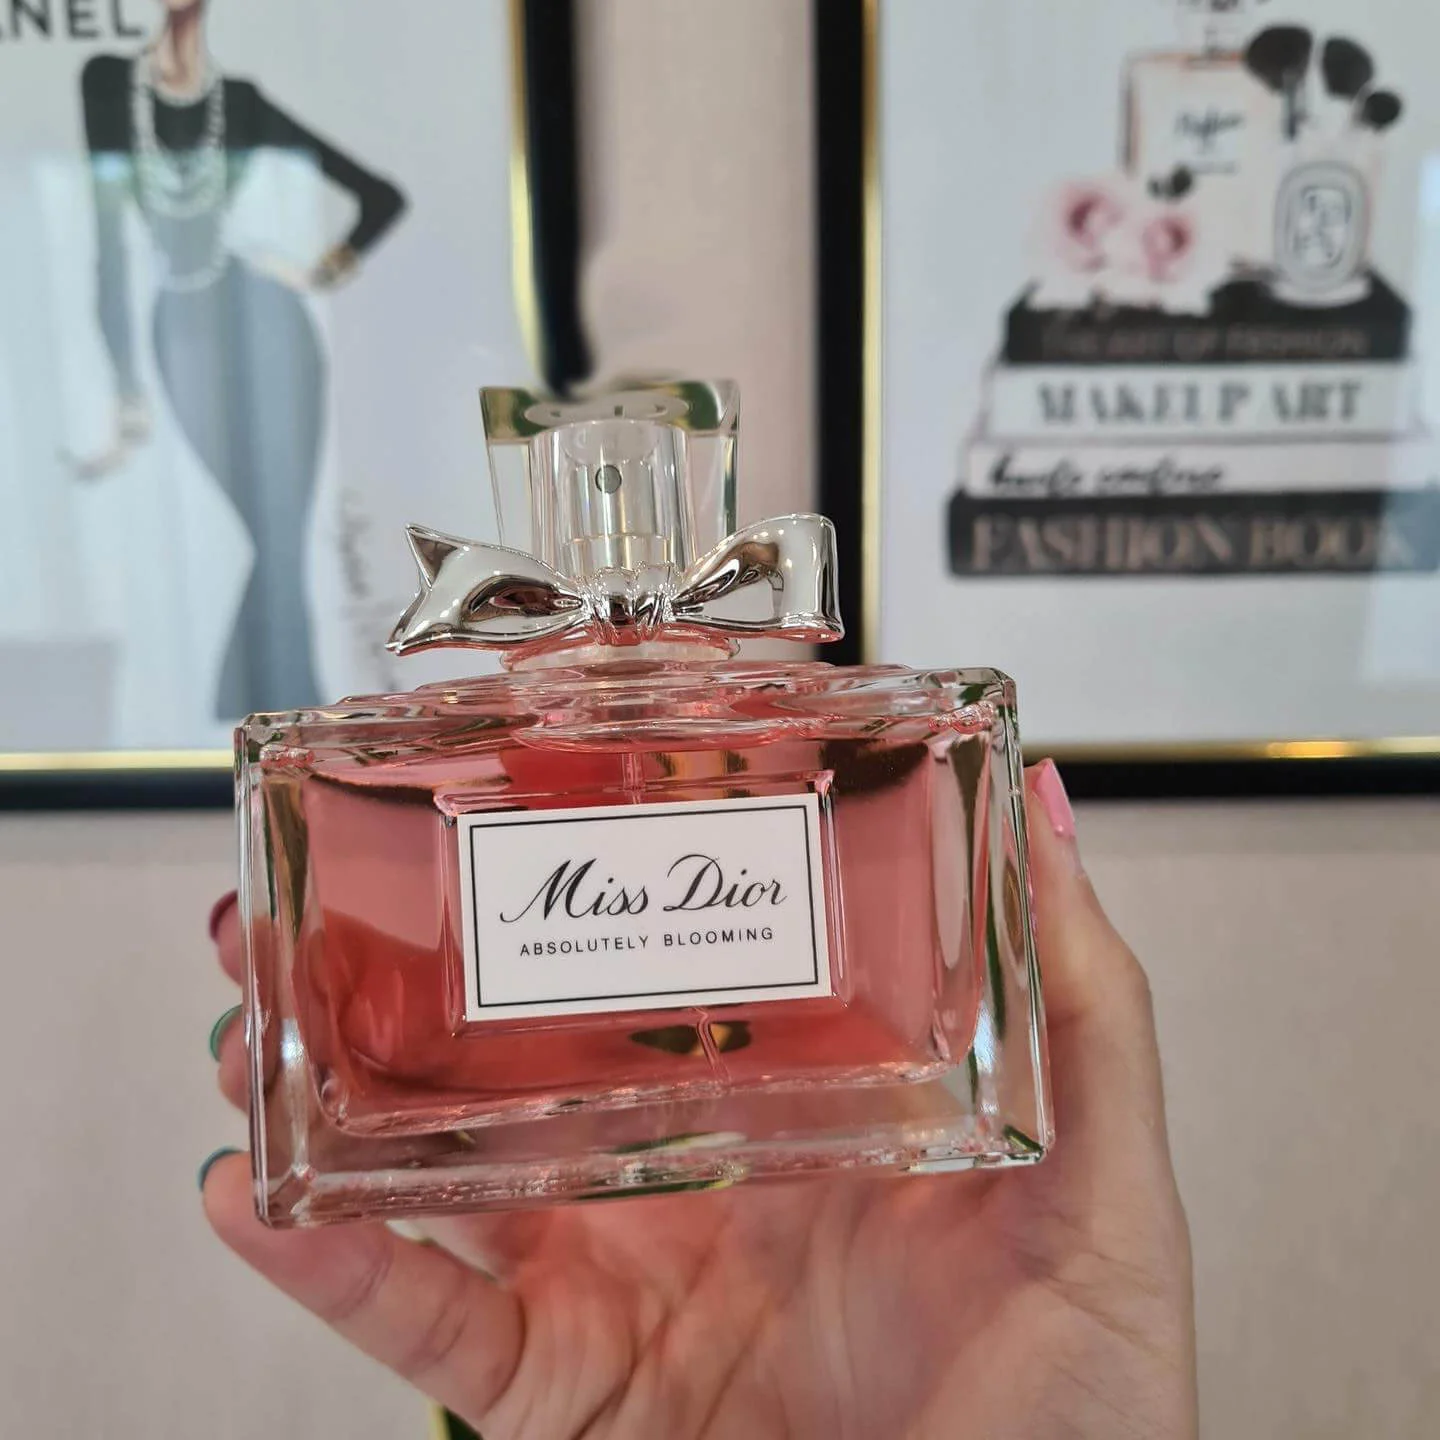 Christian Dior MISS DIOR ABSOLUTELY BLOOMING at Fragrance Vault in Tahoe   F Vault